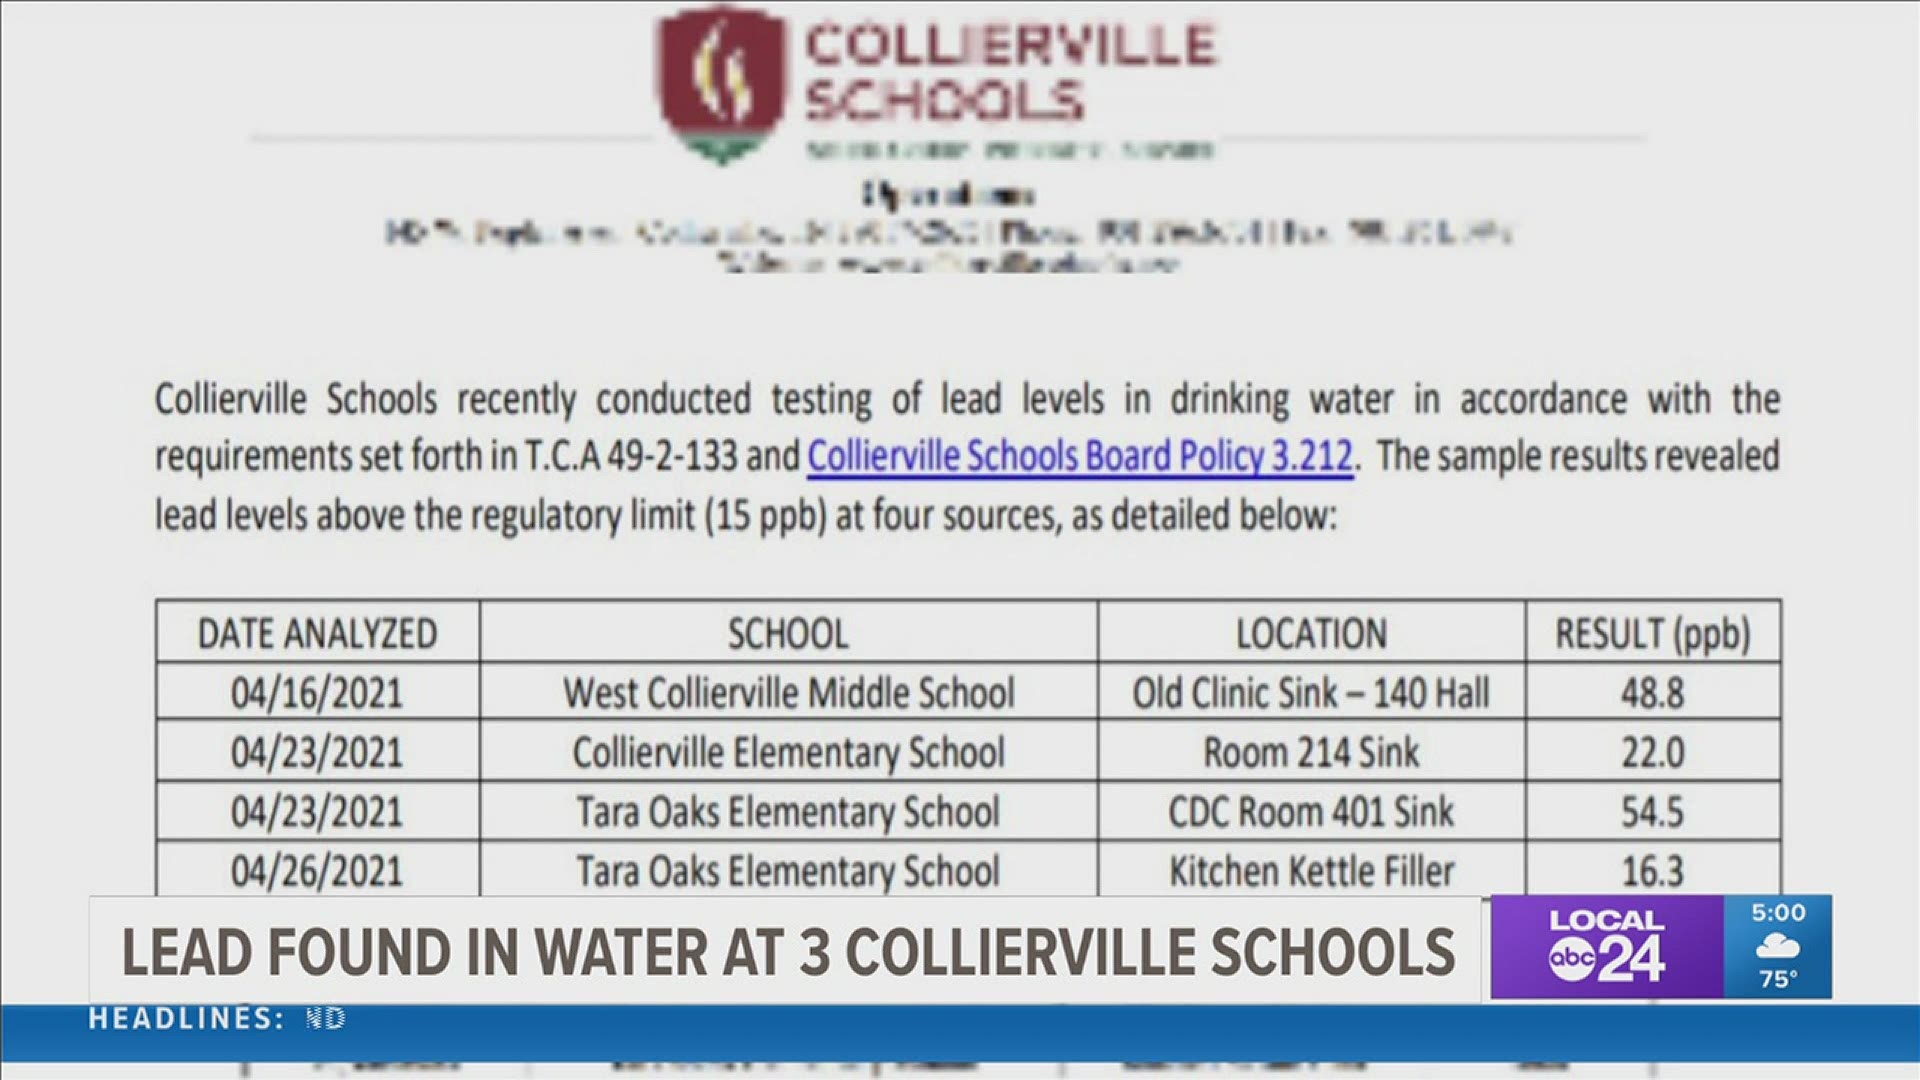 West Collierville Middle School, Collierville Elementary, and Tara Oaks Elementary are all affected.